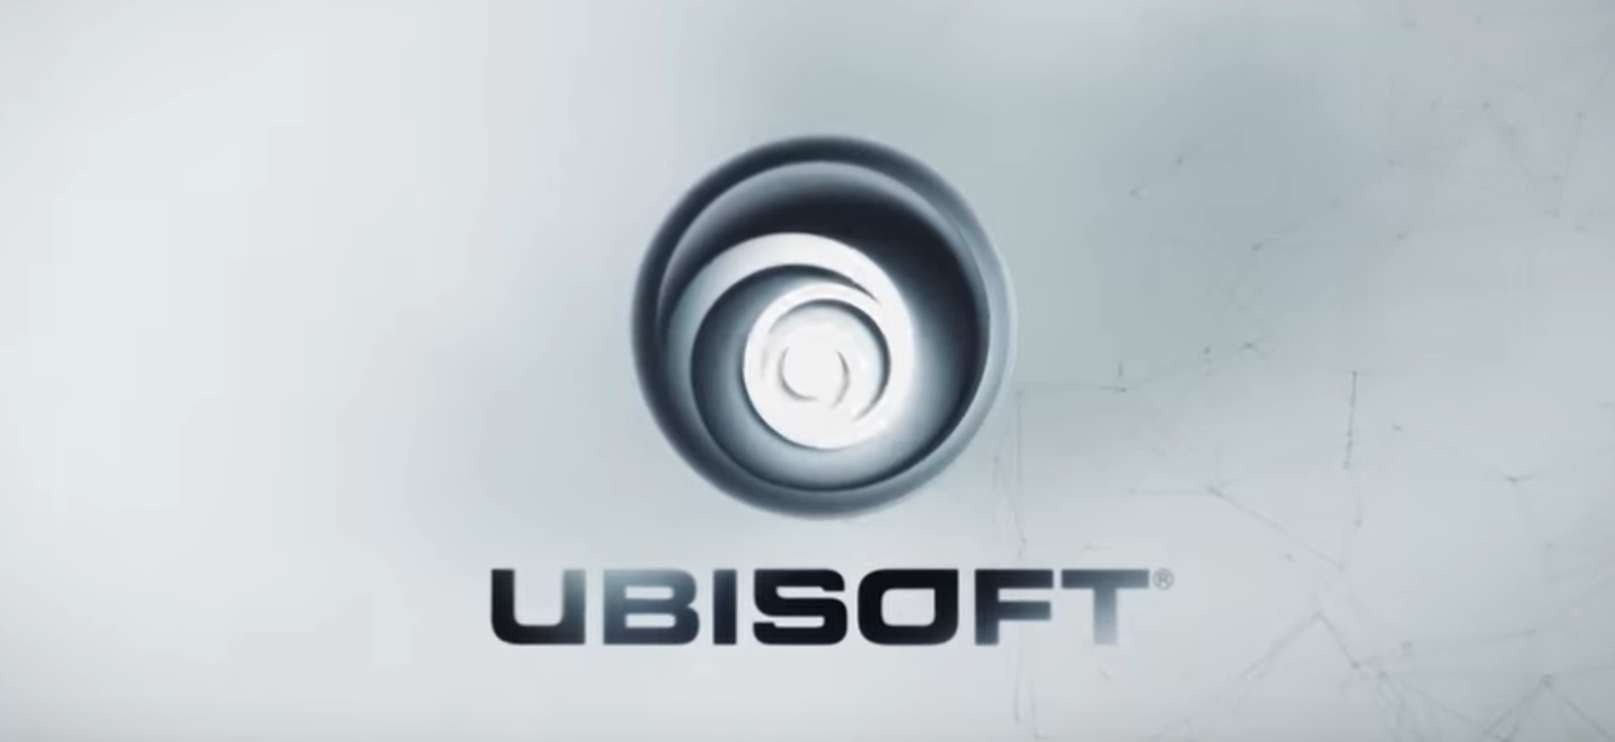 Ubisoft CEO Issues An Apology For The Company’s Many Scandals Prior To Ubisoft Forward Event